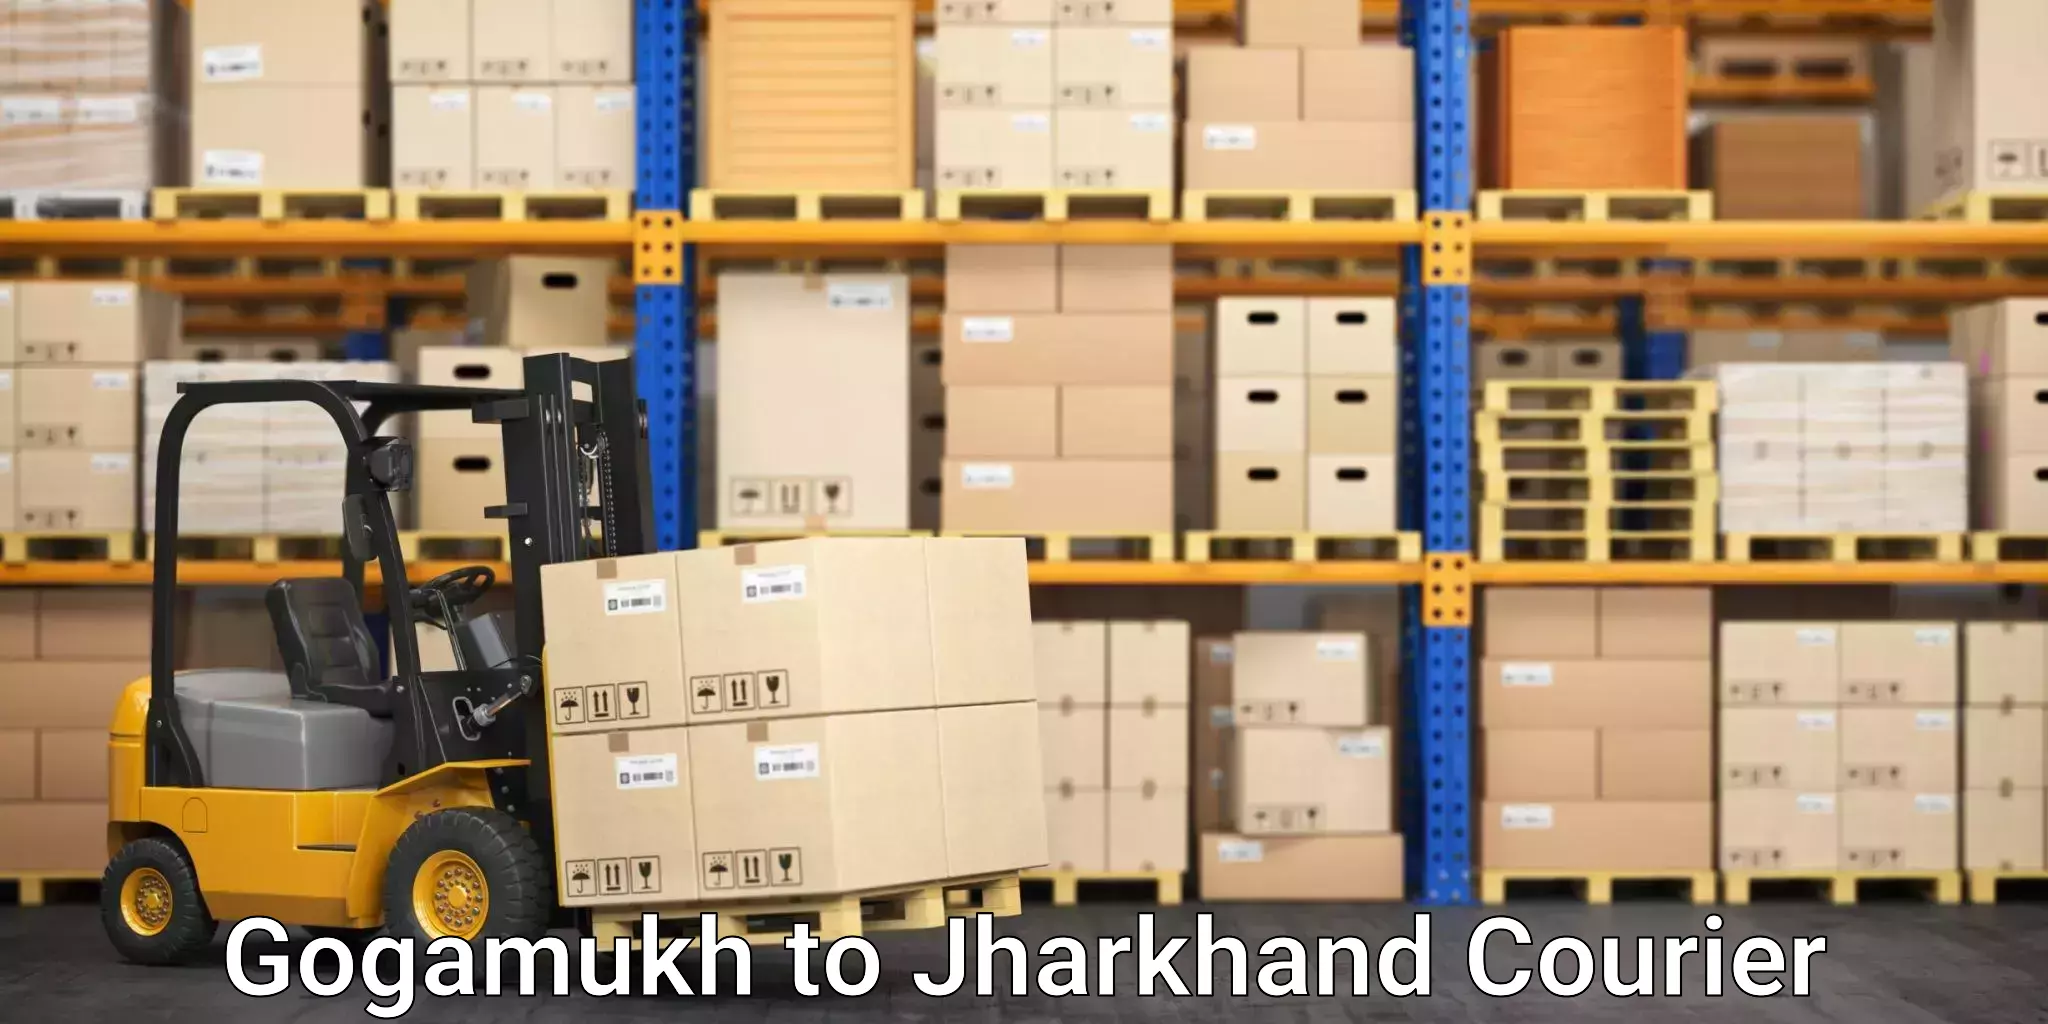 Urgent courier needs in Gogamukh to Jharkhand